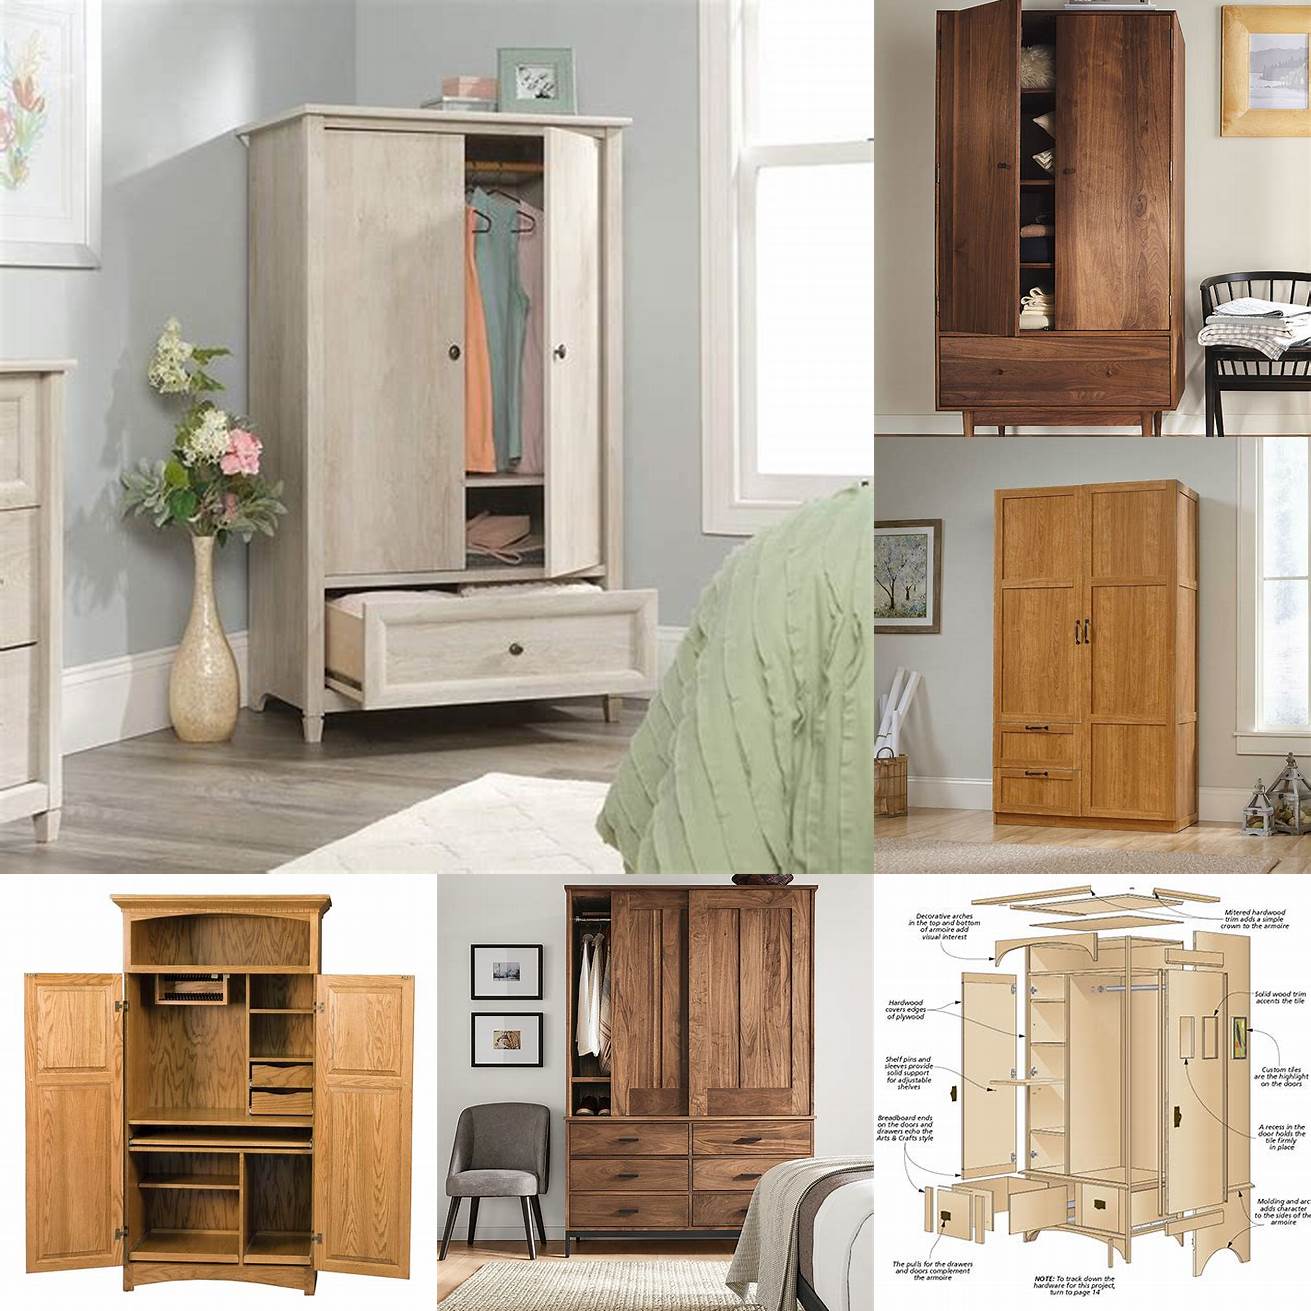 Size Make sure the armoire fits the space you have in mind